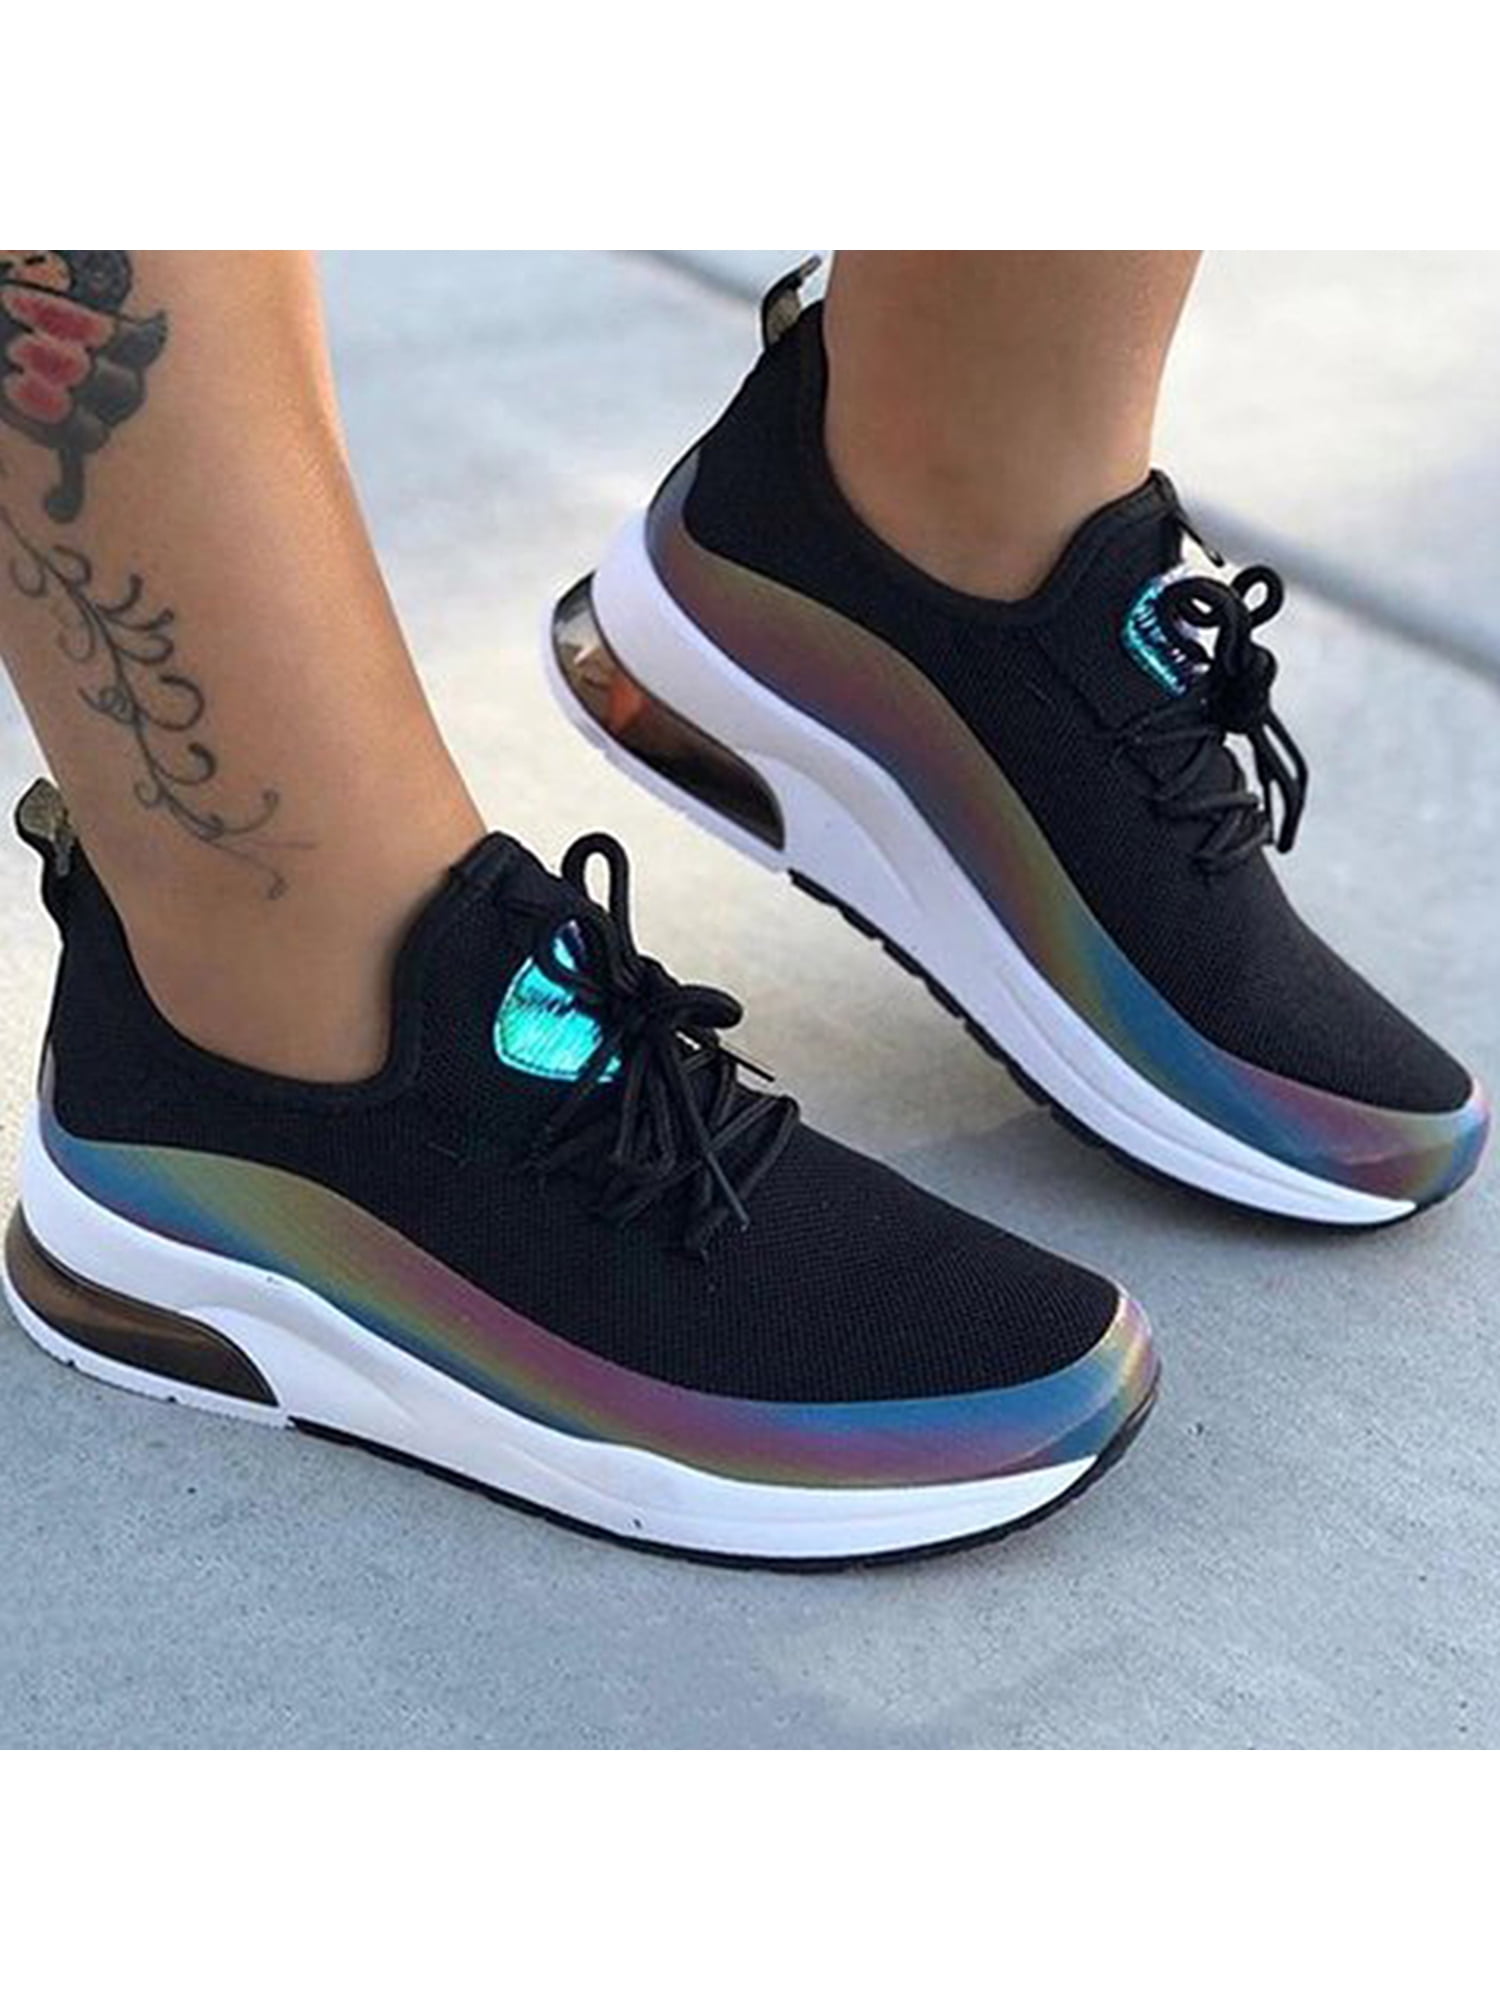 Women's Lace Up Thick Sole Running Walking Low Top Shoes Sport Athletic Sneakers 